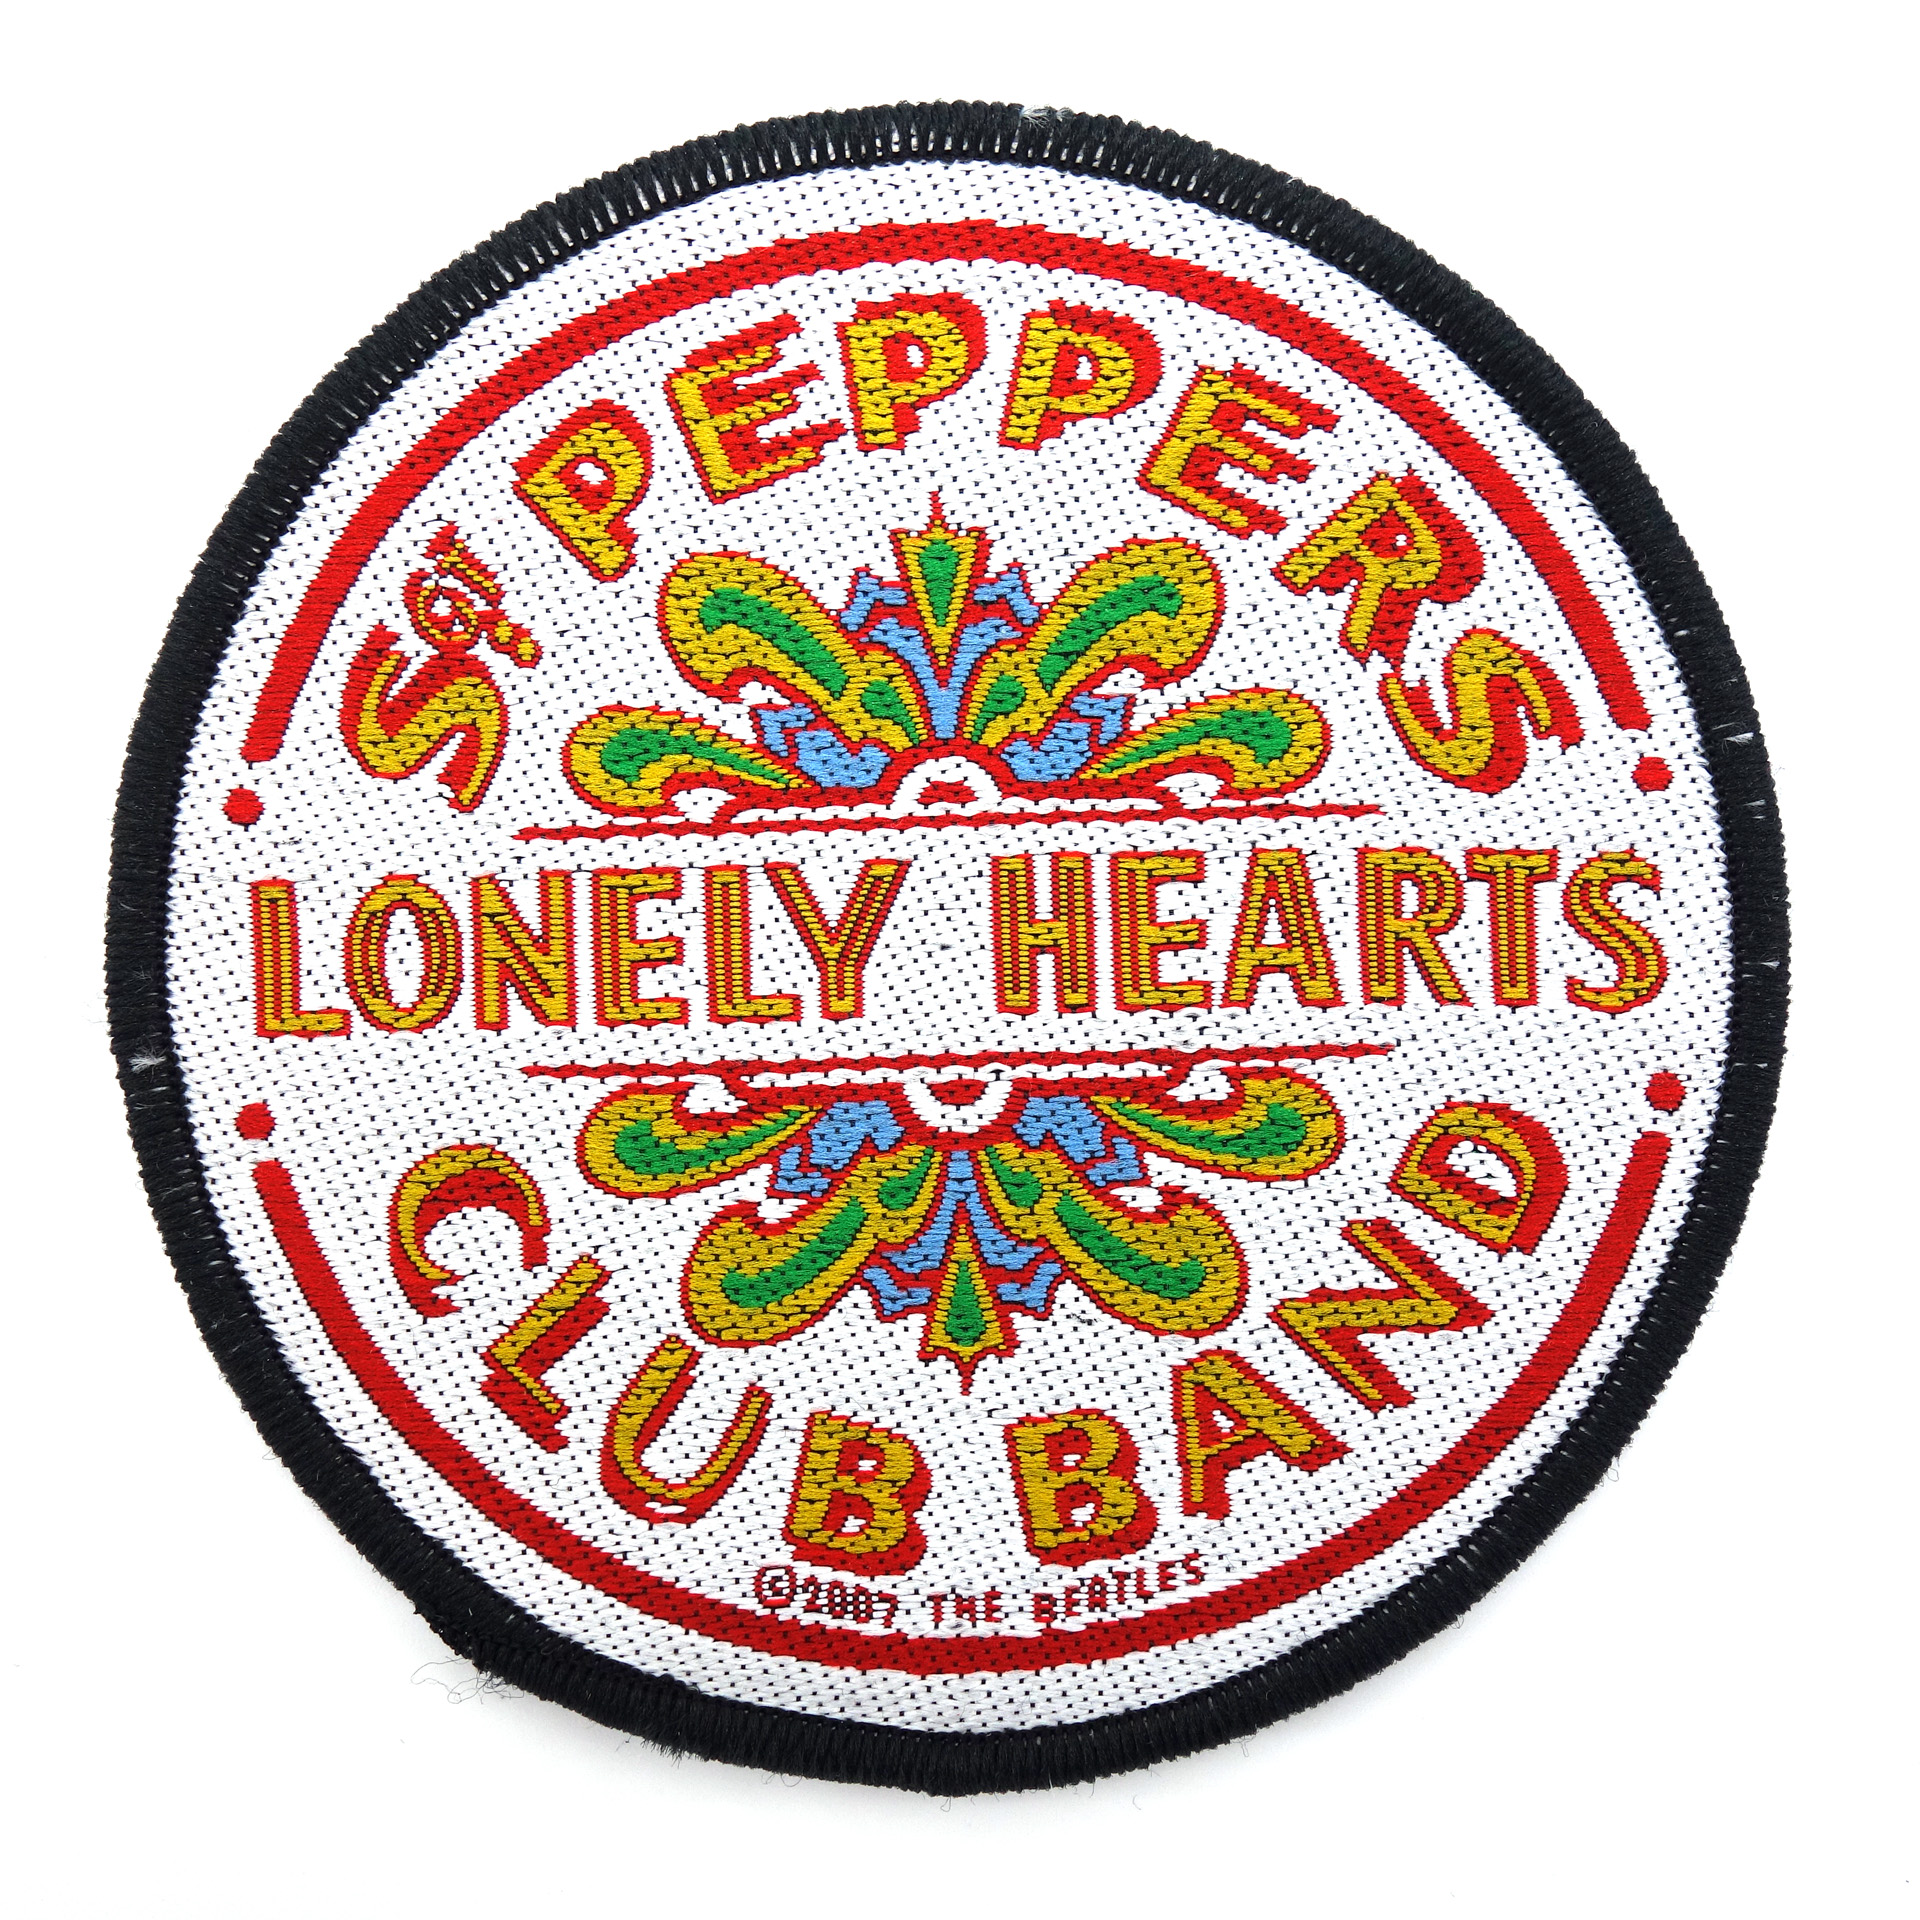 Band Patch The Beatles Sgt. Pepper's Lonely Hearts Club Band Aufnäher